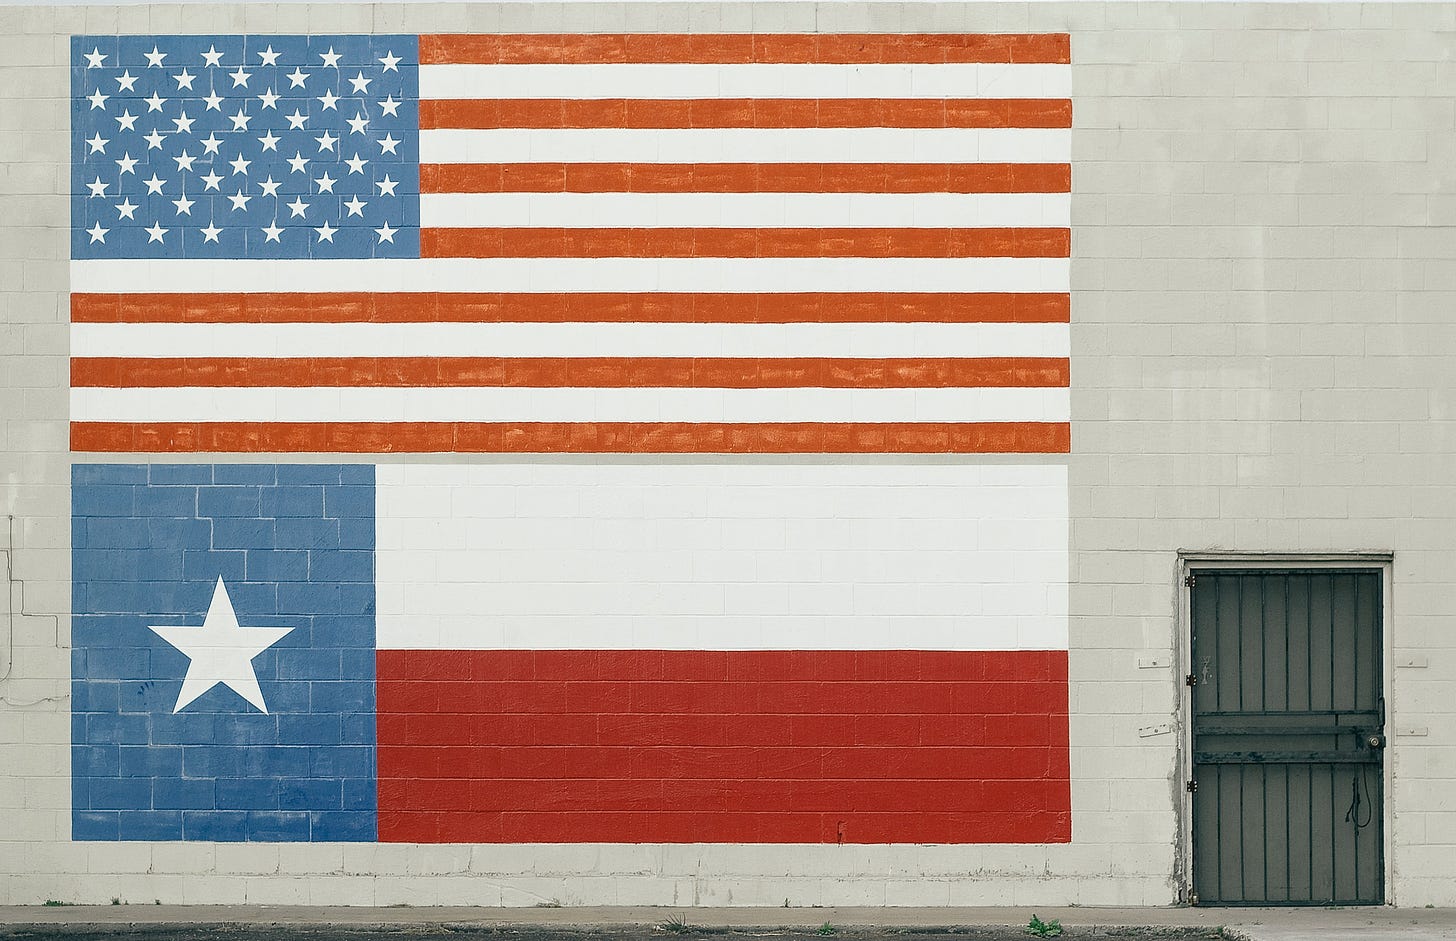 A mural of the American flag above a mural of the Texas flag, both pointed on the exterior of a white brick building. Matthew T. Rader / Unsplash